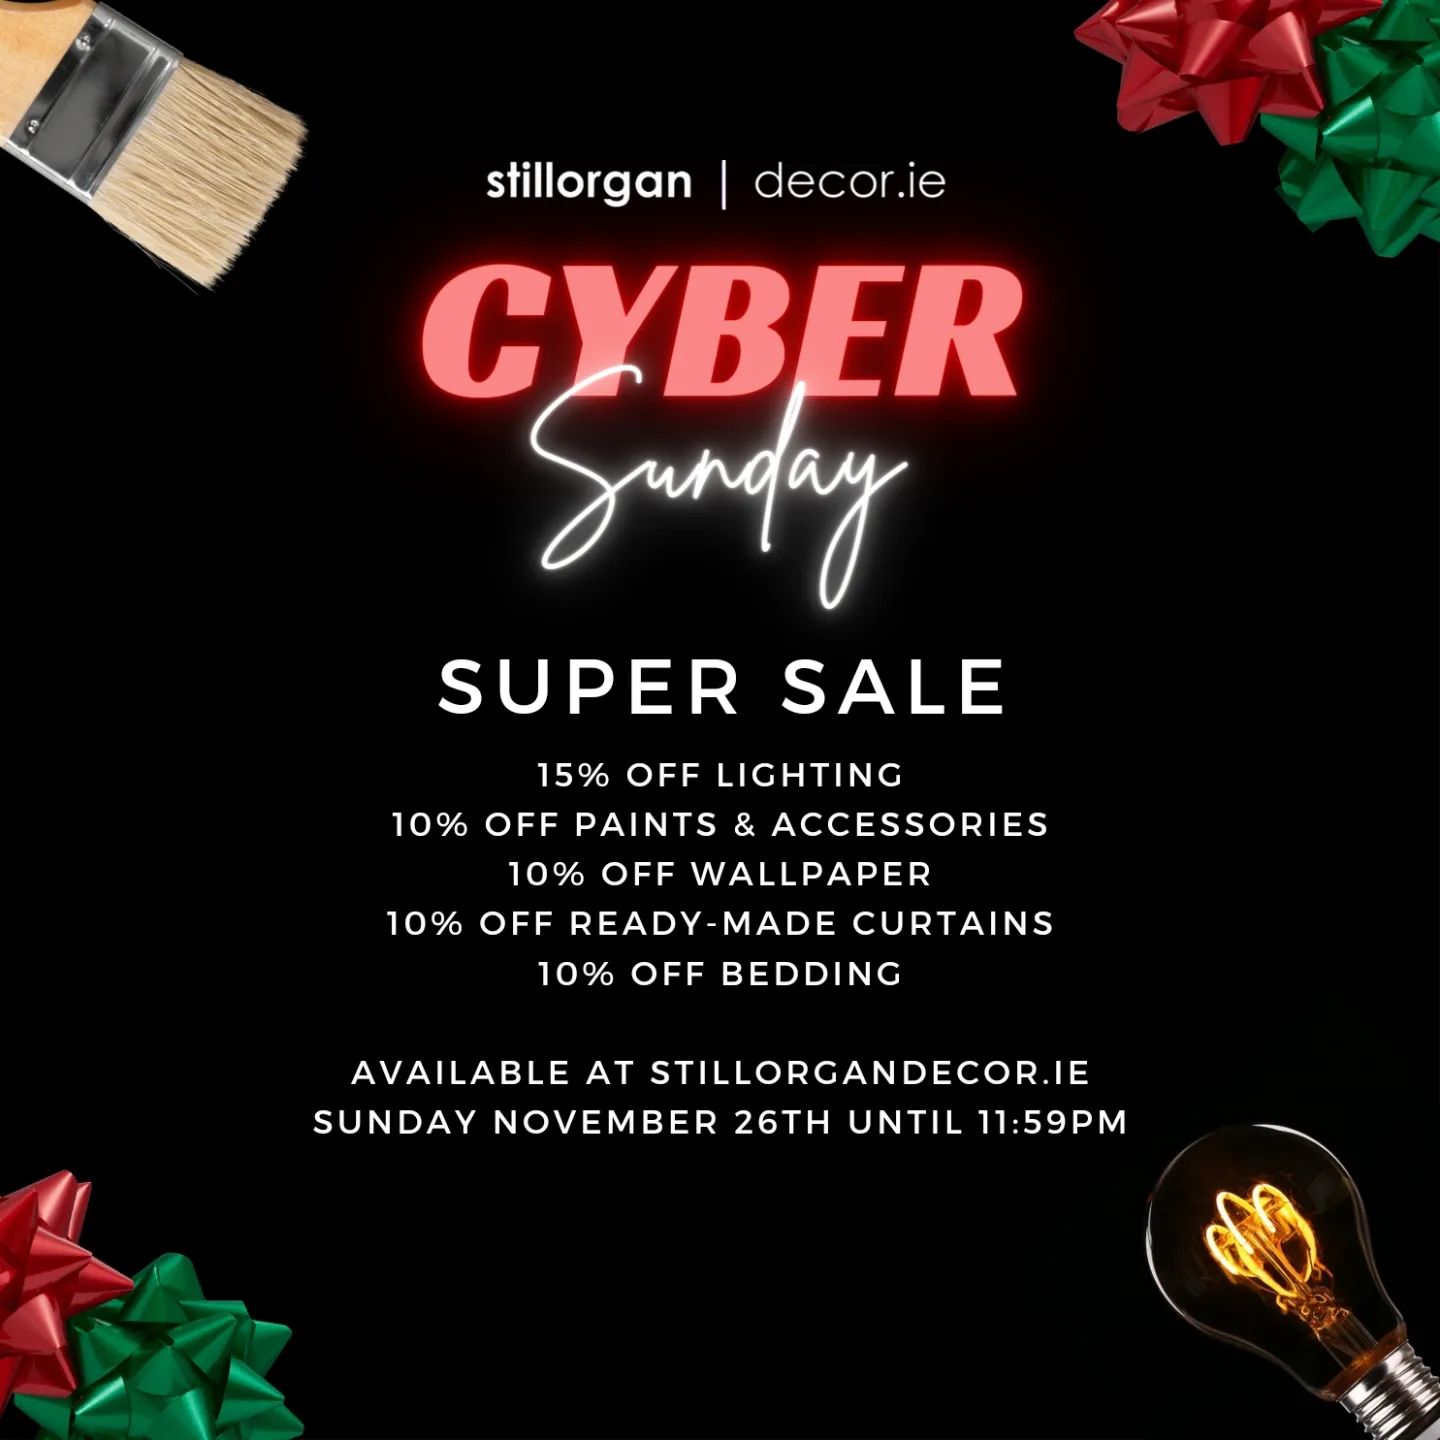 🎨💡 Save big in our stillorgandecor.ie Cyber Sunday Super Sale! 💡🎨

Visit stillorgandecor.ie and save 15% on lighting, 10% on paints and accessories, 10% on wallpaper, 10% on readymade curtains and 10% on bedding!

Offers available until 11:59pm Sunday November 26th 2023.

Terms and conditions apply.